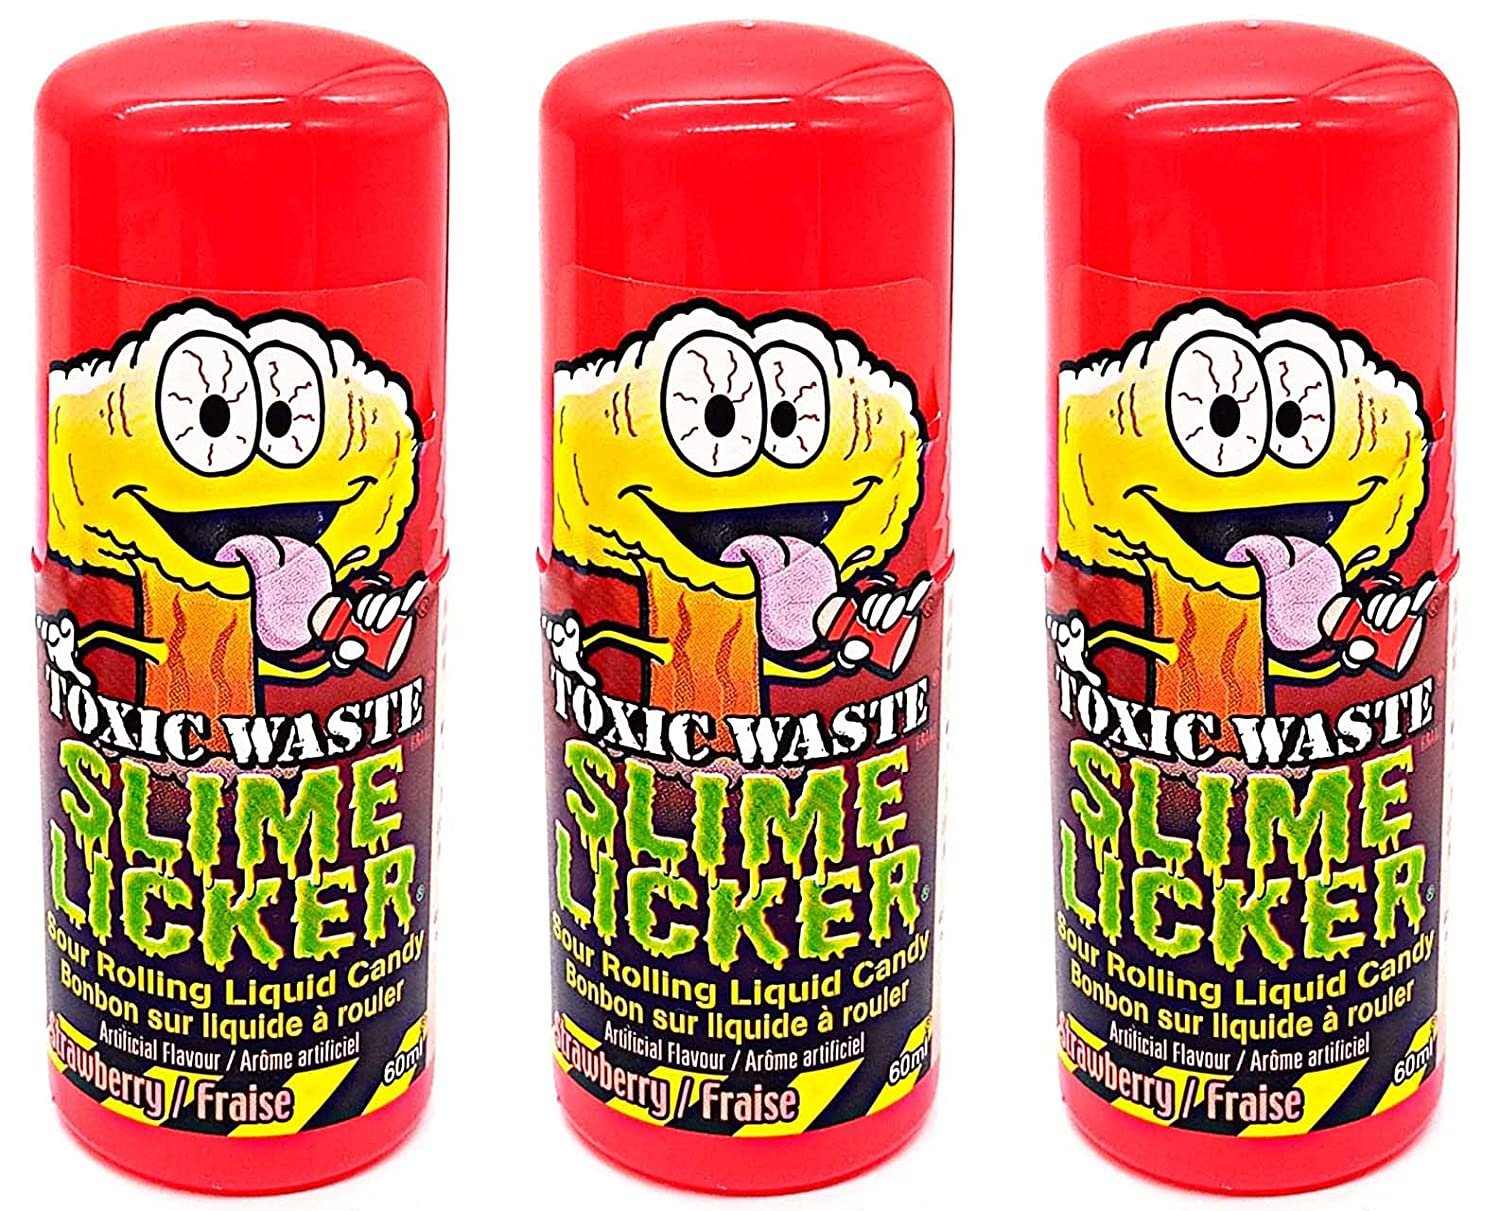 Toxic Waste - Slime Licker Sour Candy 3-Pack of Strawberry - 2oz